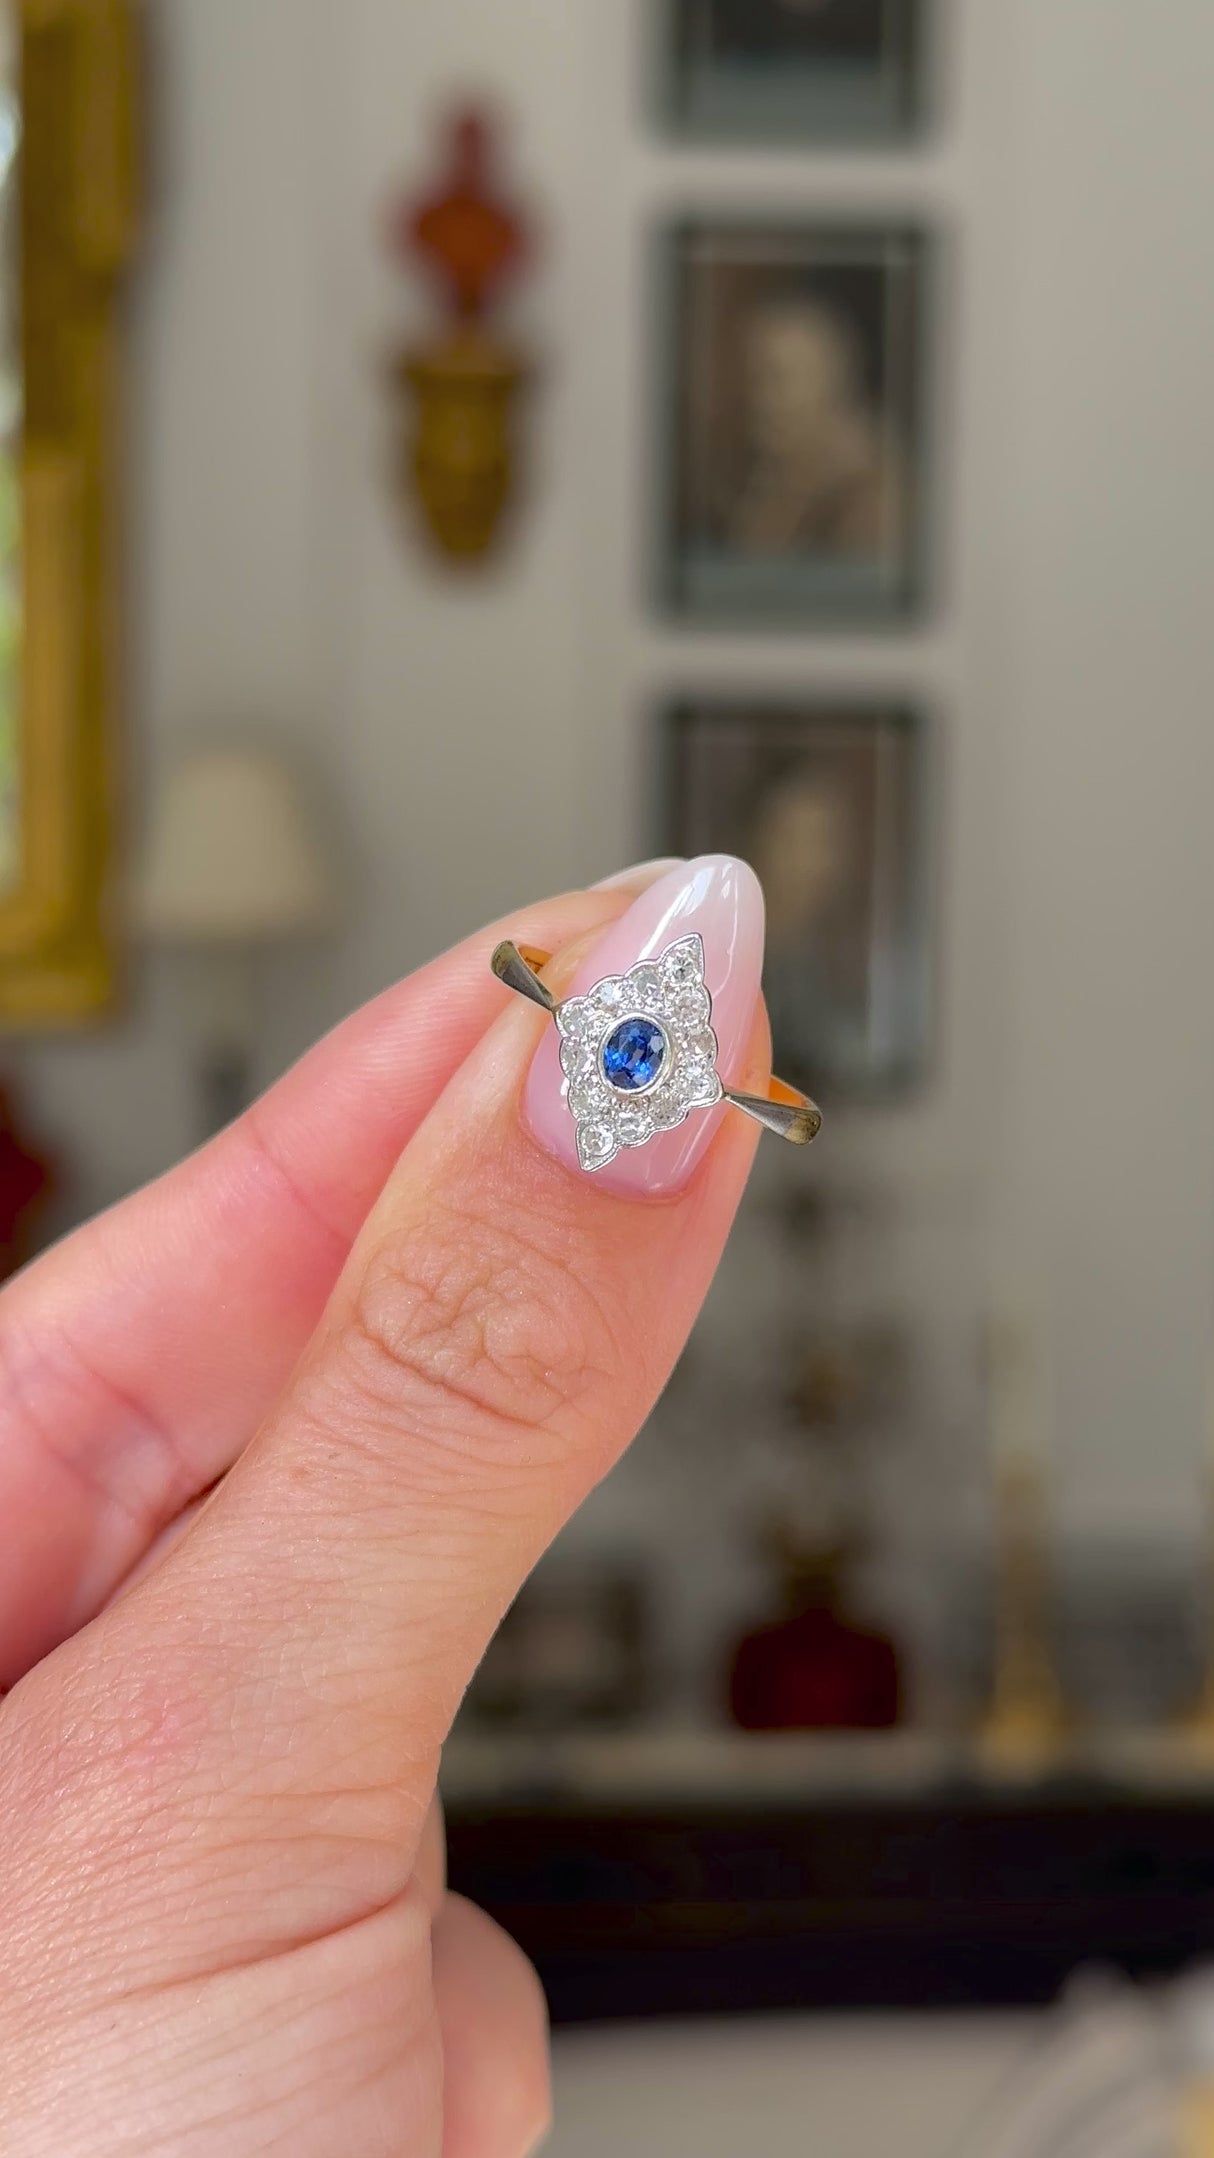 antique edwardian sapphire and diamond kite shaped ring, held in fingers and rotated to give perspective, front view